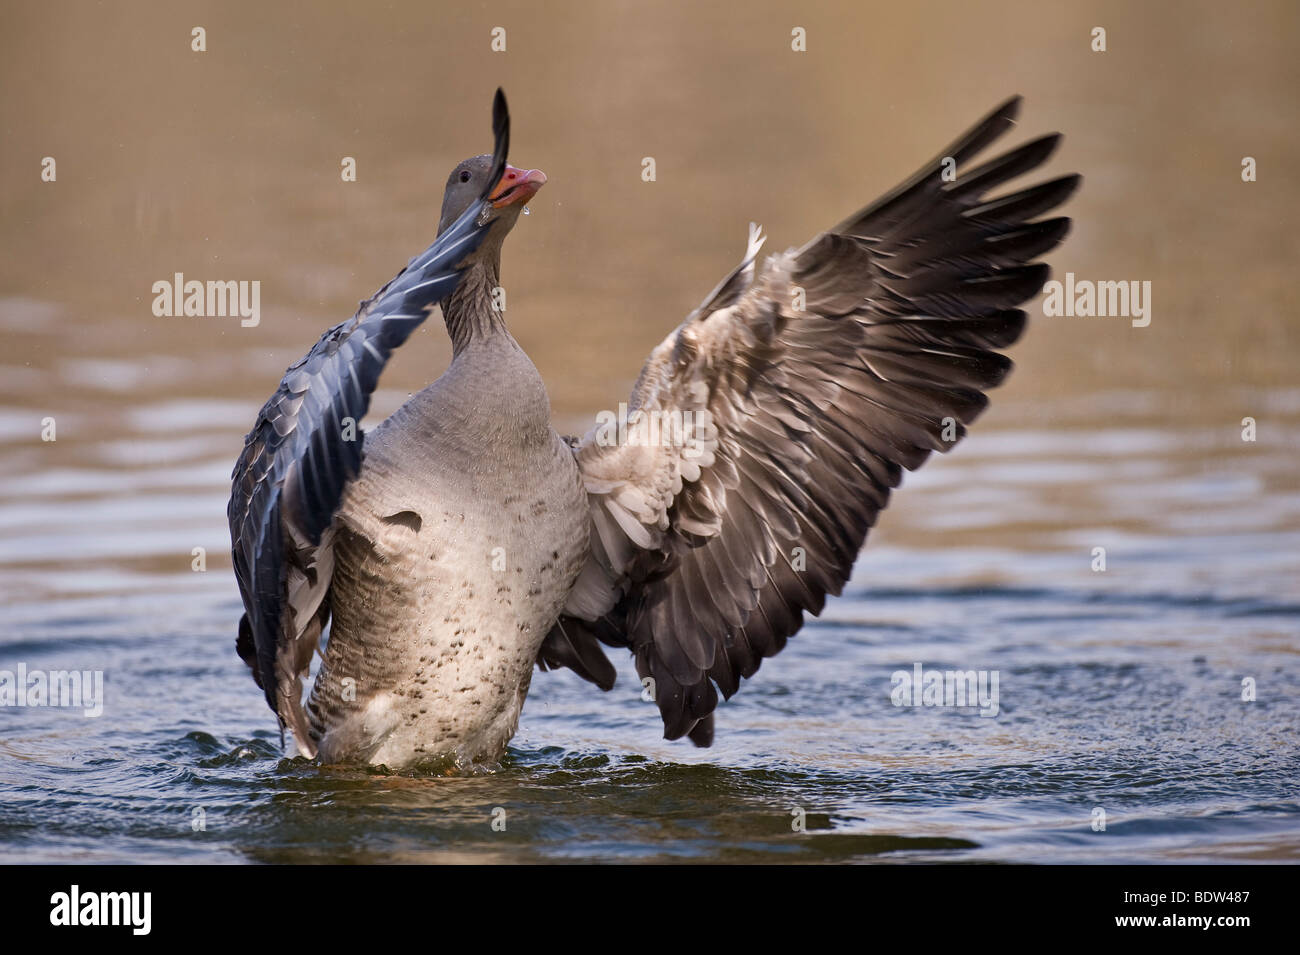 A greylag goose courting a potential partner Stock Photo